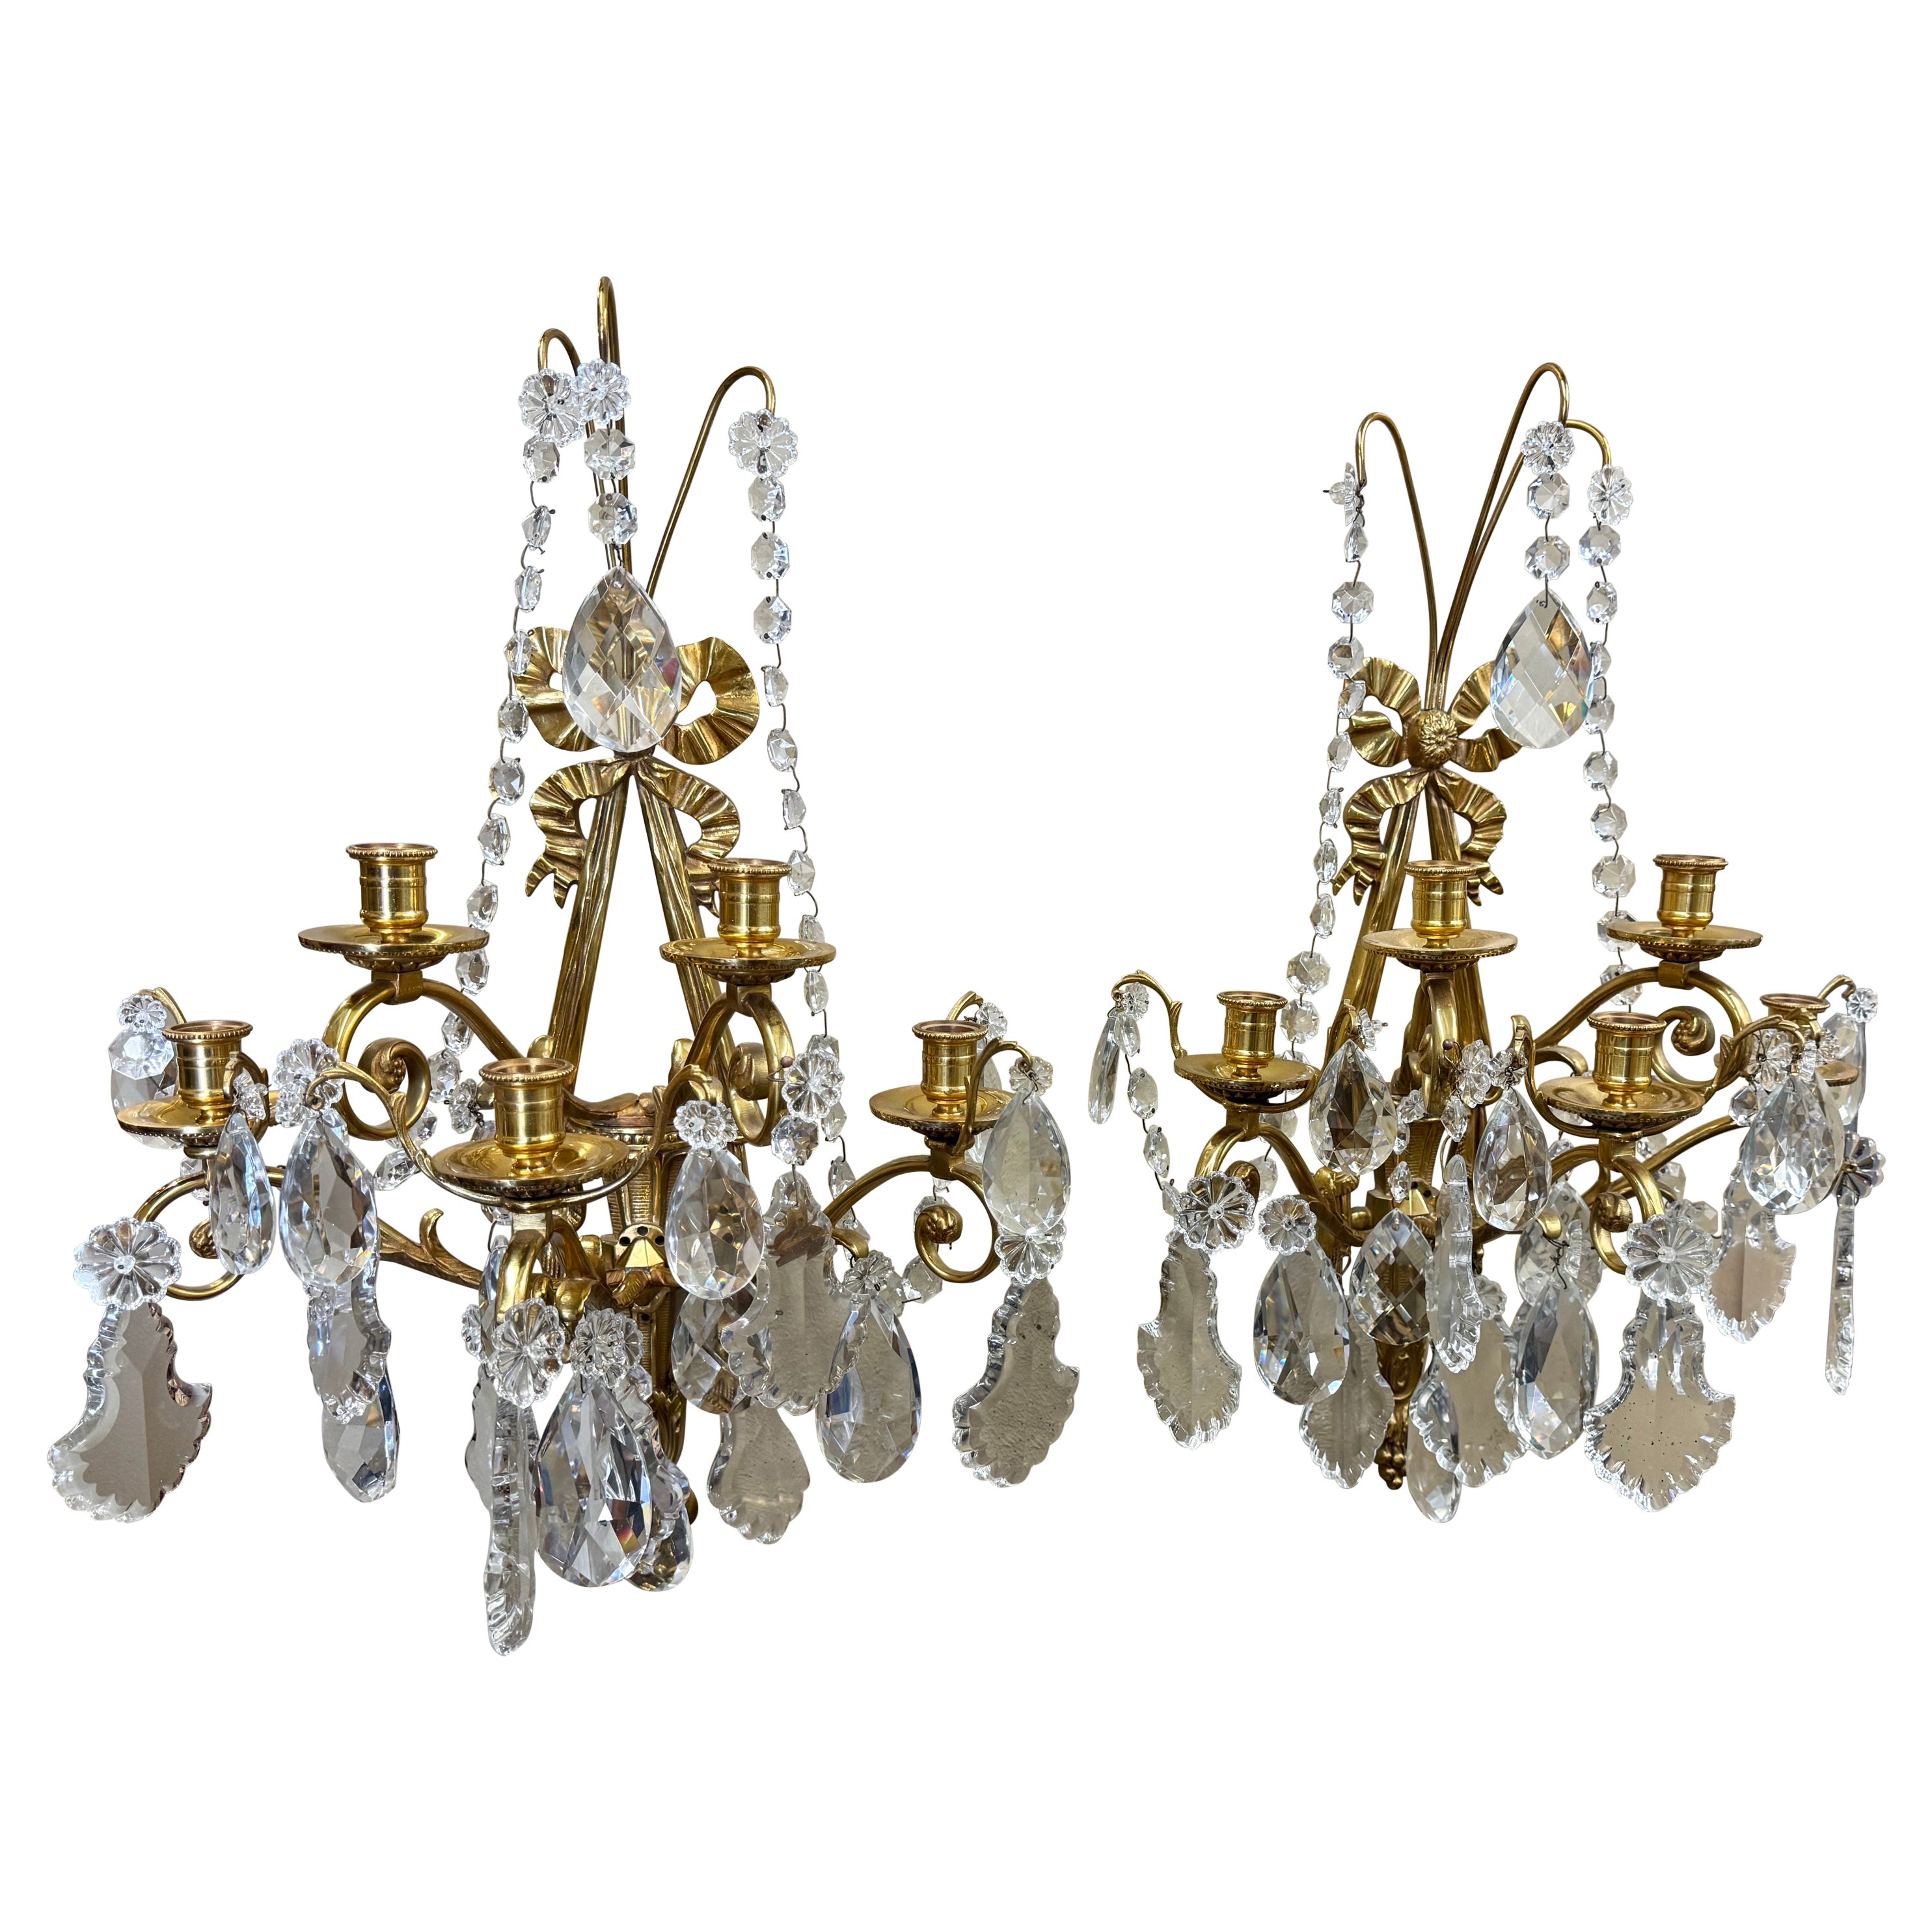 Pair of Mid-Century French Louis XVI Crystal and Bronze Dore Five-Light Sconces